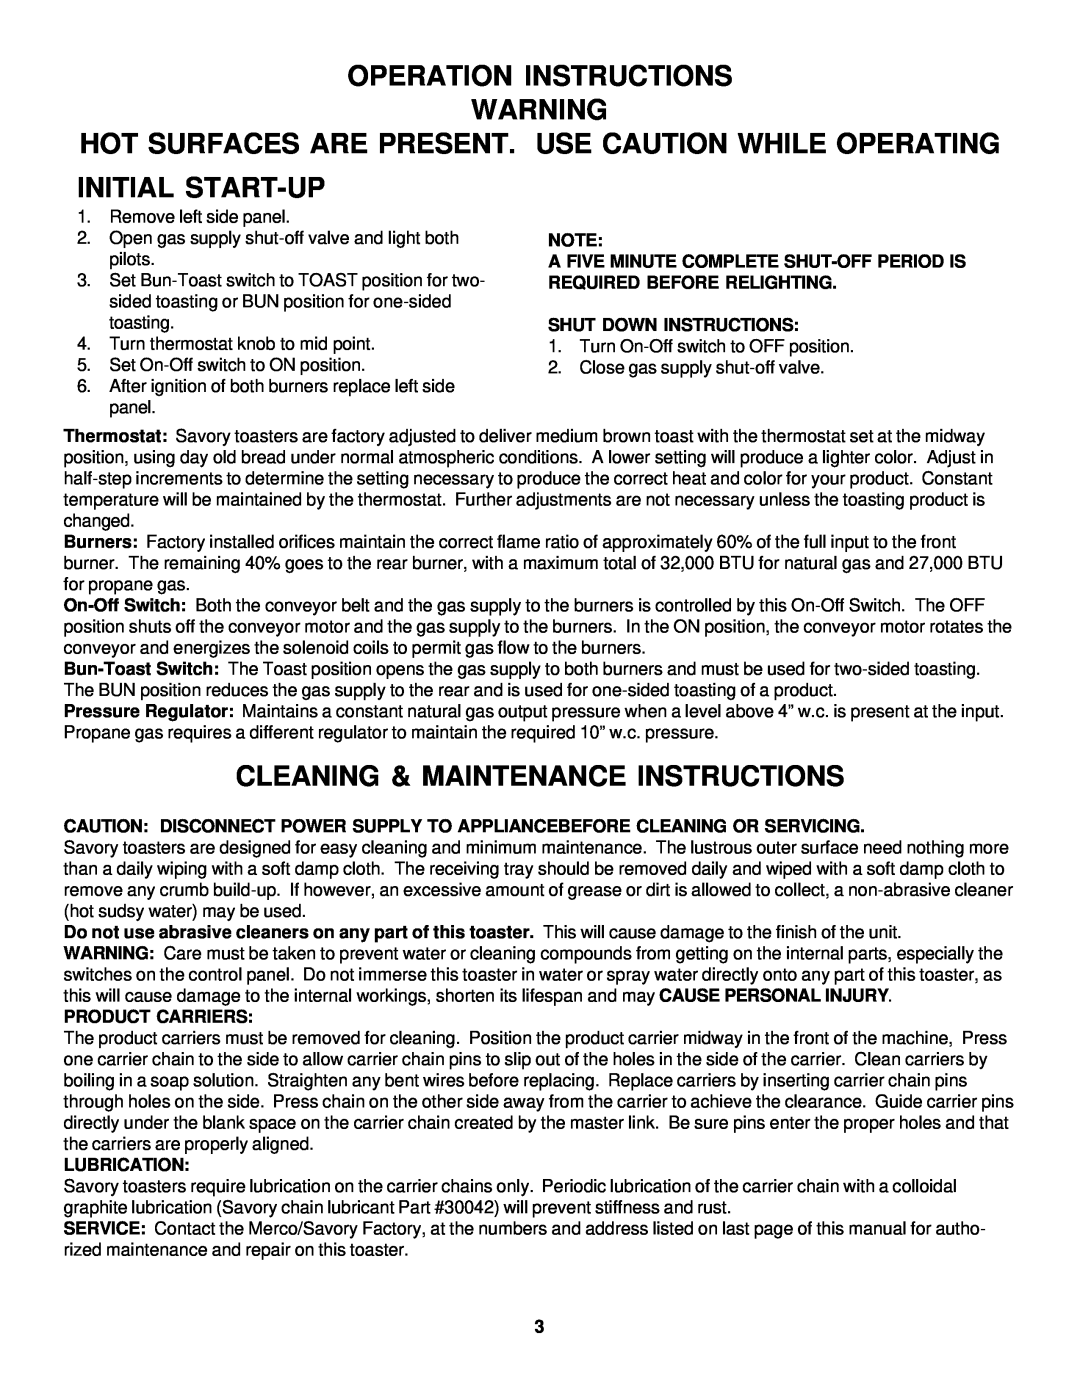 Merco Savory CG-30 Operation Instructions, Initial Start-Up, Cleaning & Maintenance Instructions, Shut Down Instructions 